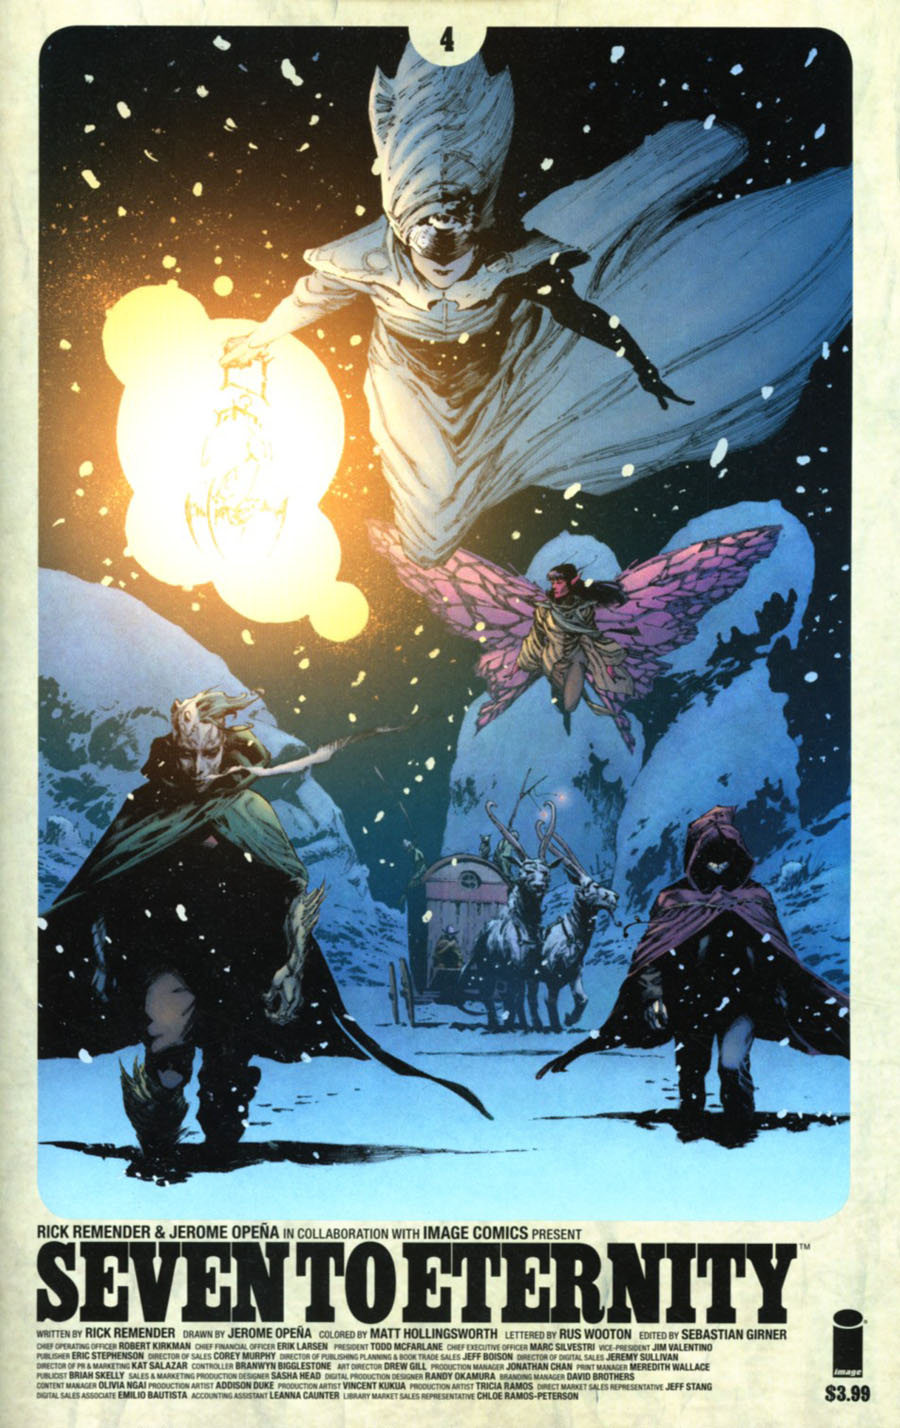 Seven To Eternity #4 Cover A Jerome Opena & Matt Hollingsworth